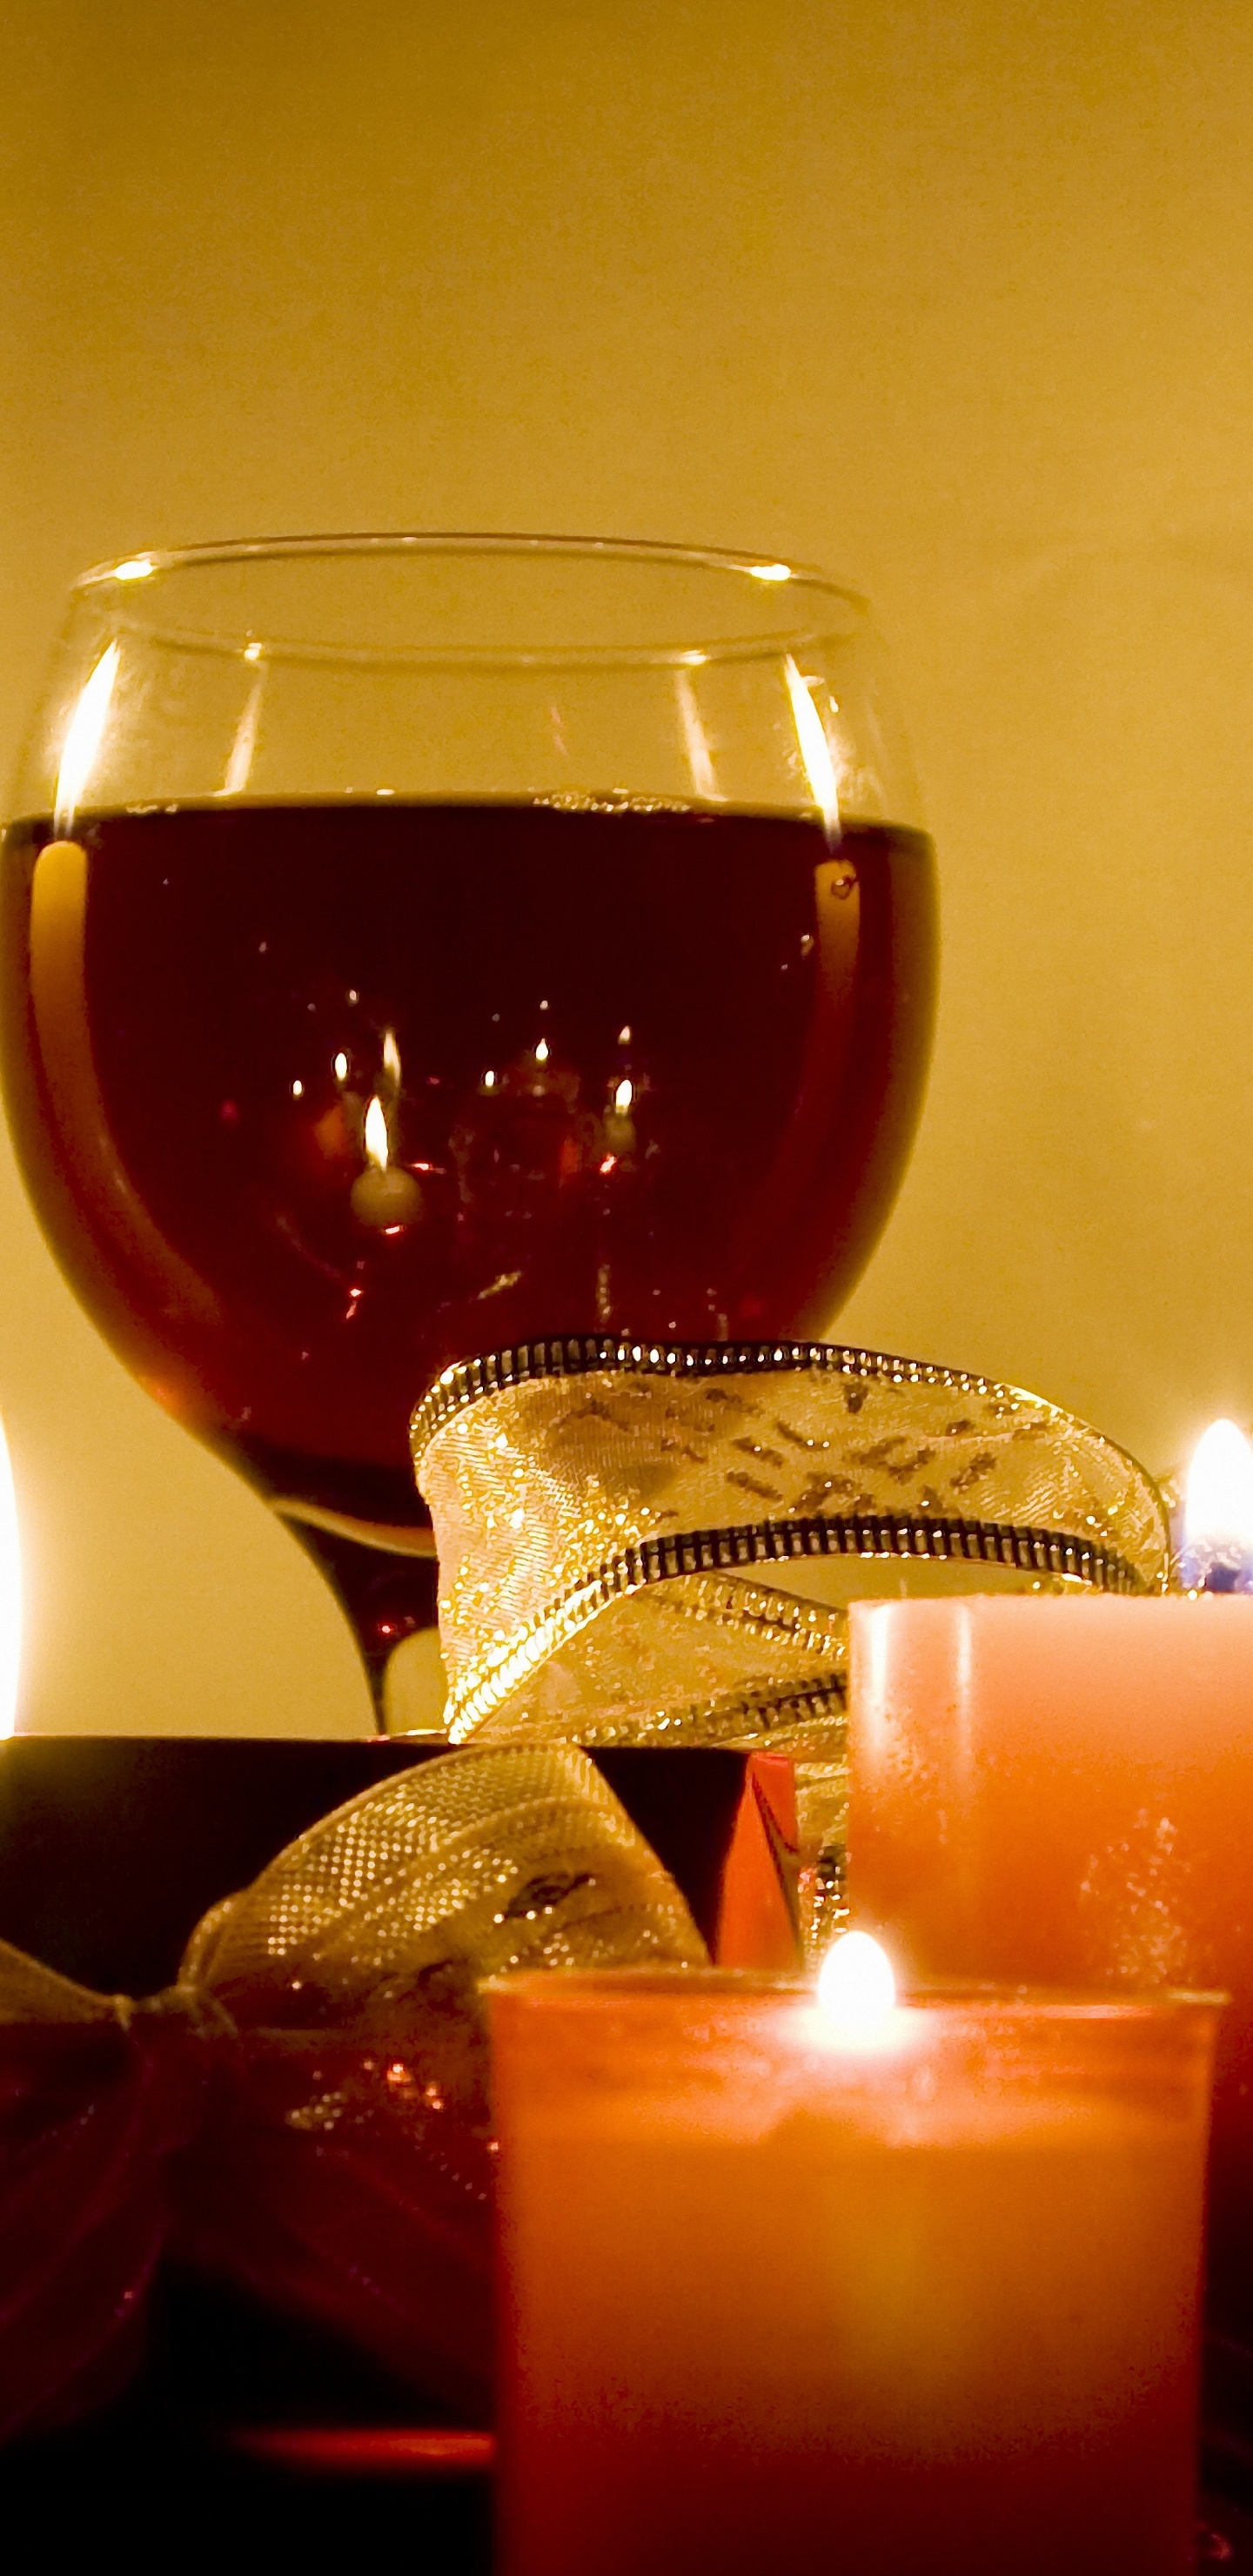 Wine, Candle, Lighting, Wax, Still Life. Wallpaper in 1440x2960 Resolution